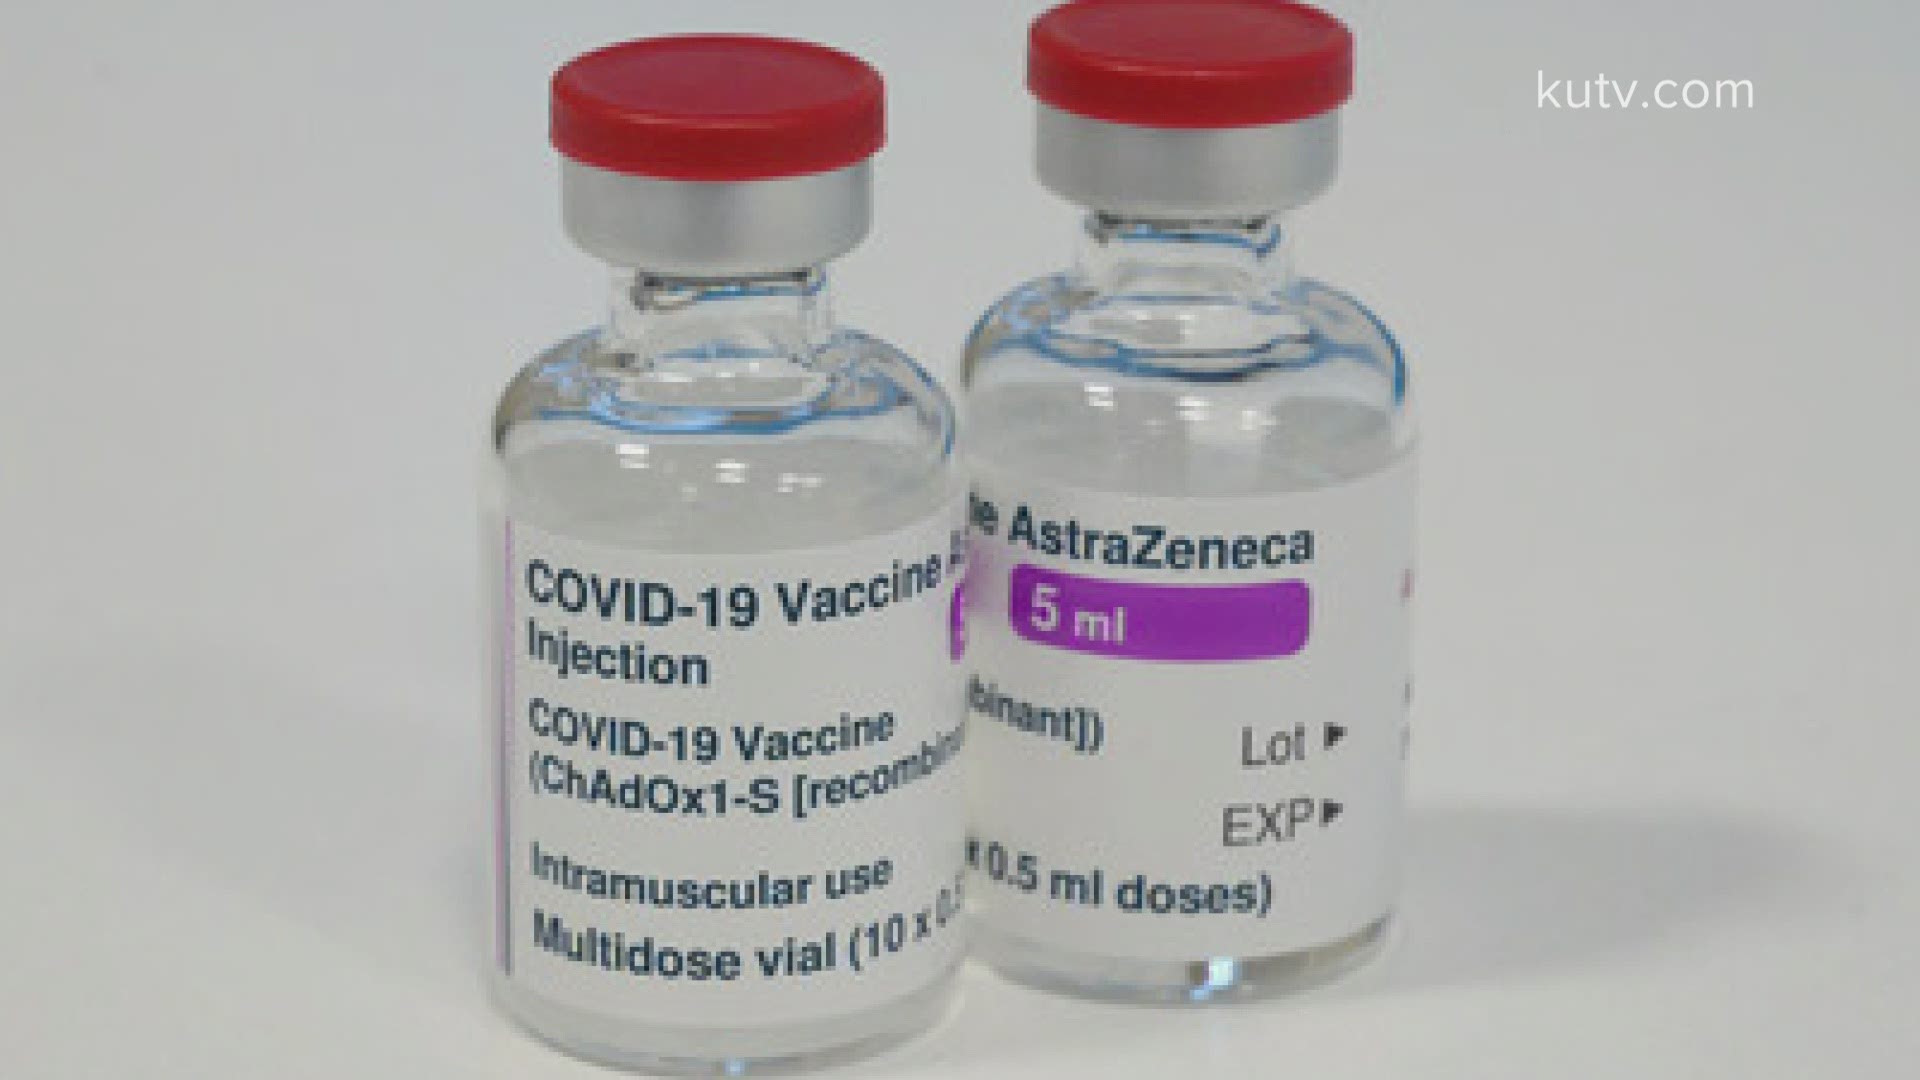 The federal government plans to buy 300 million doses of AstraZeneca's vaccine, but there is no word on when, and how much of it will be available after approval.